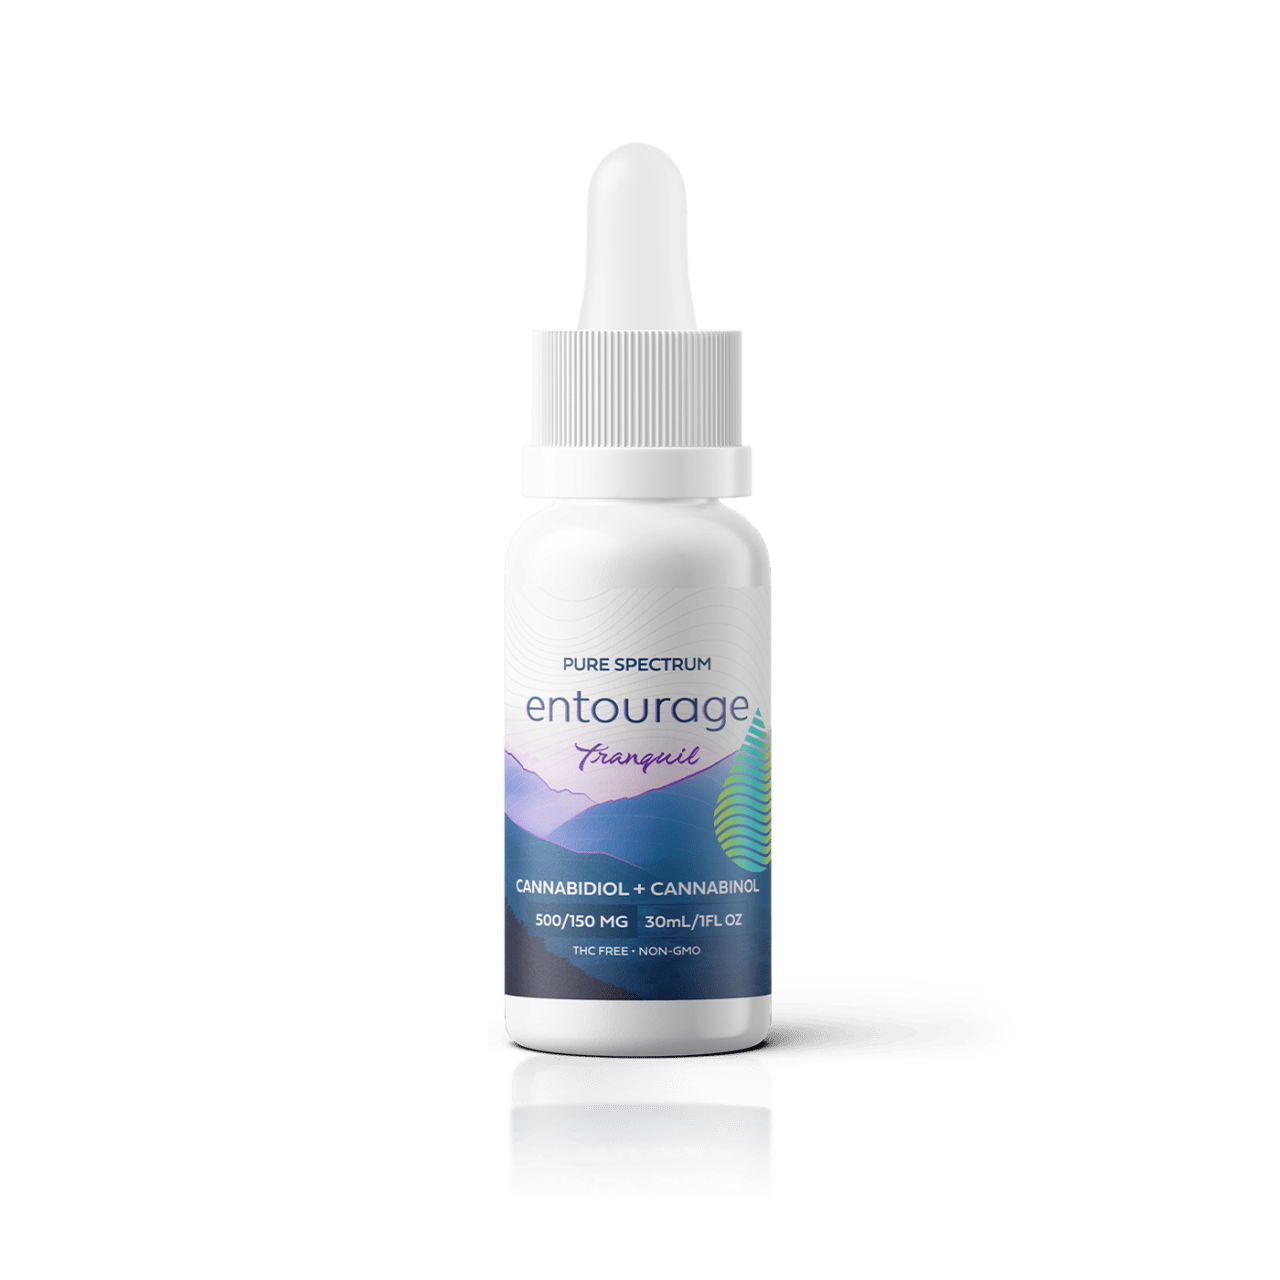 Pure Spectrum, Entourage CBD and CBN Oil, Tranquil, 1oz, 500mg CBD and 150mg CBN 1